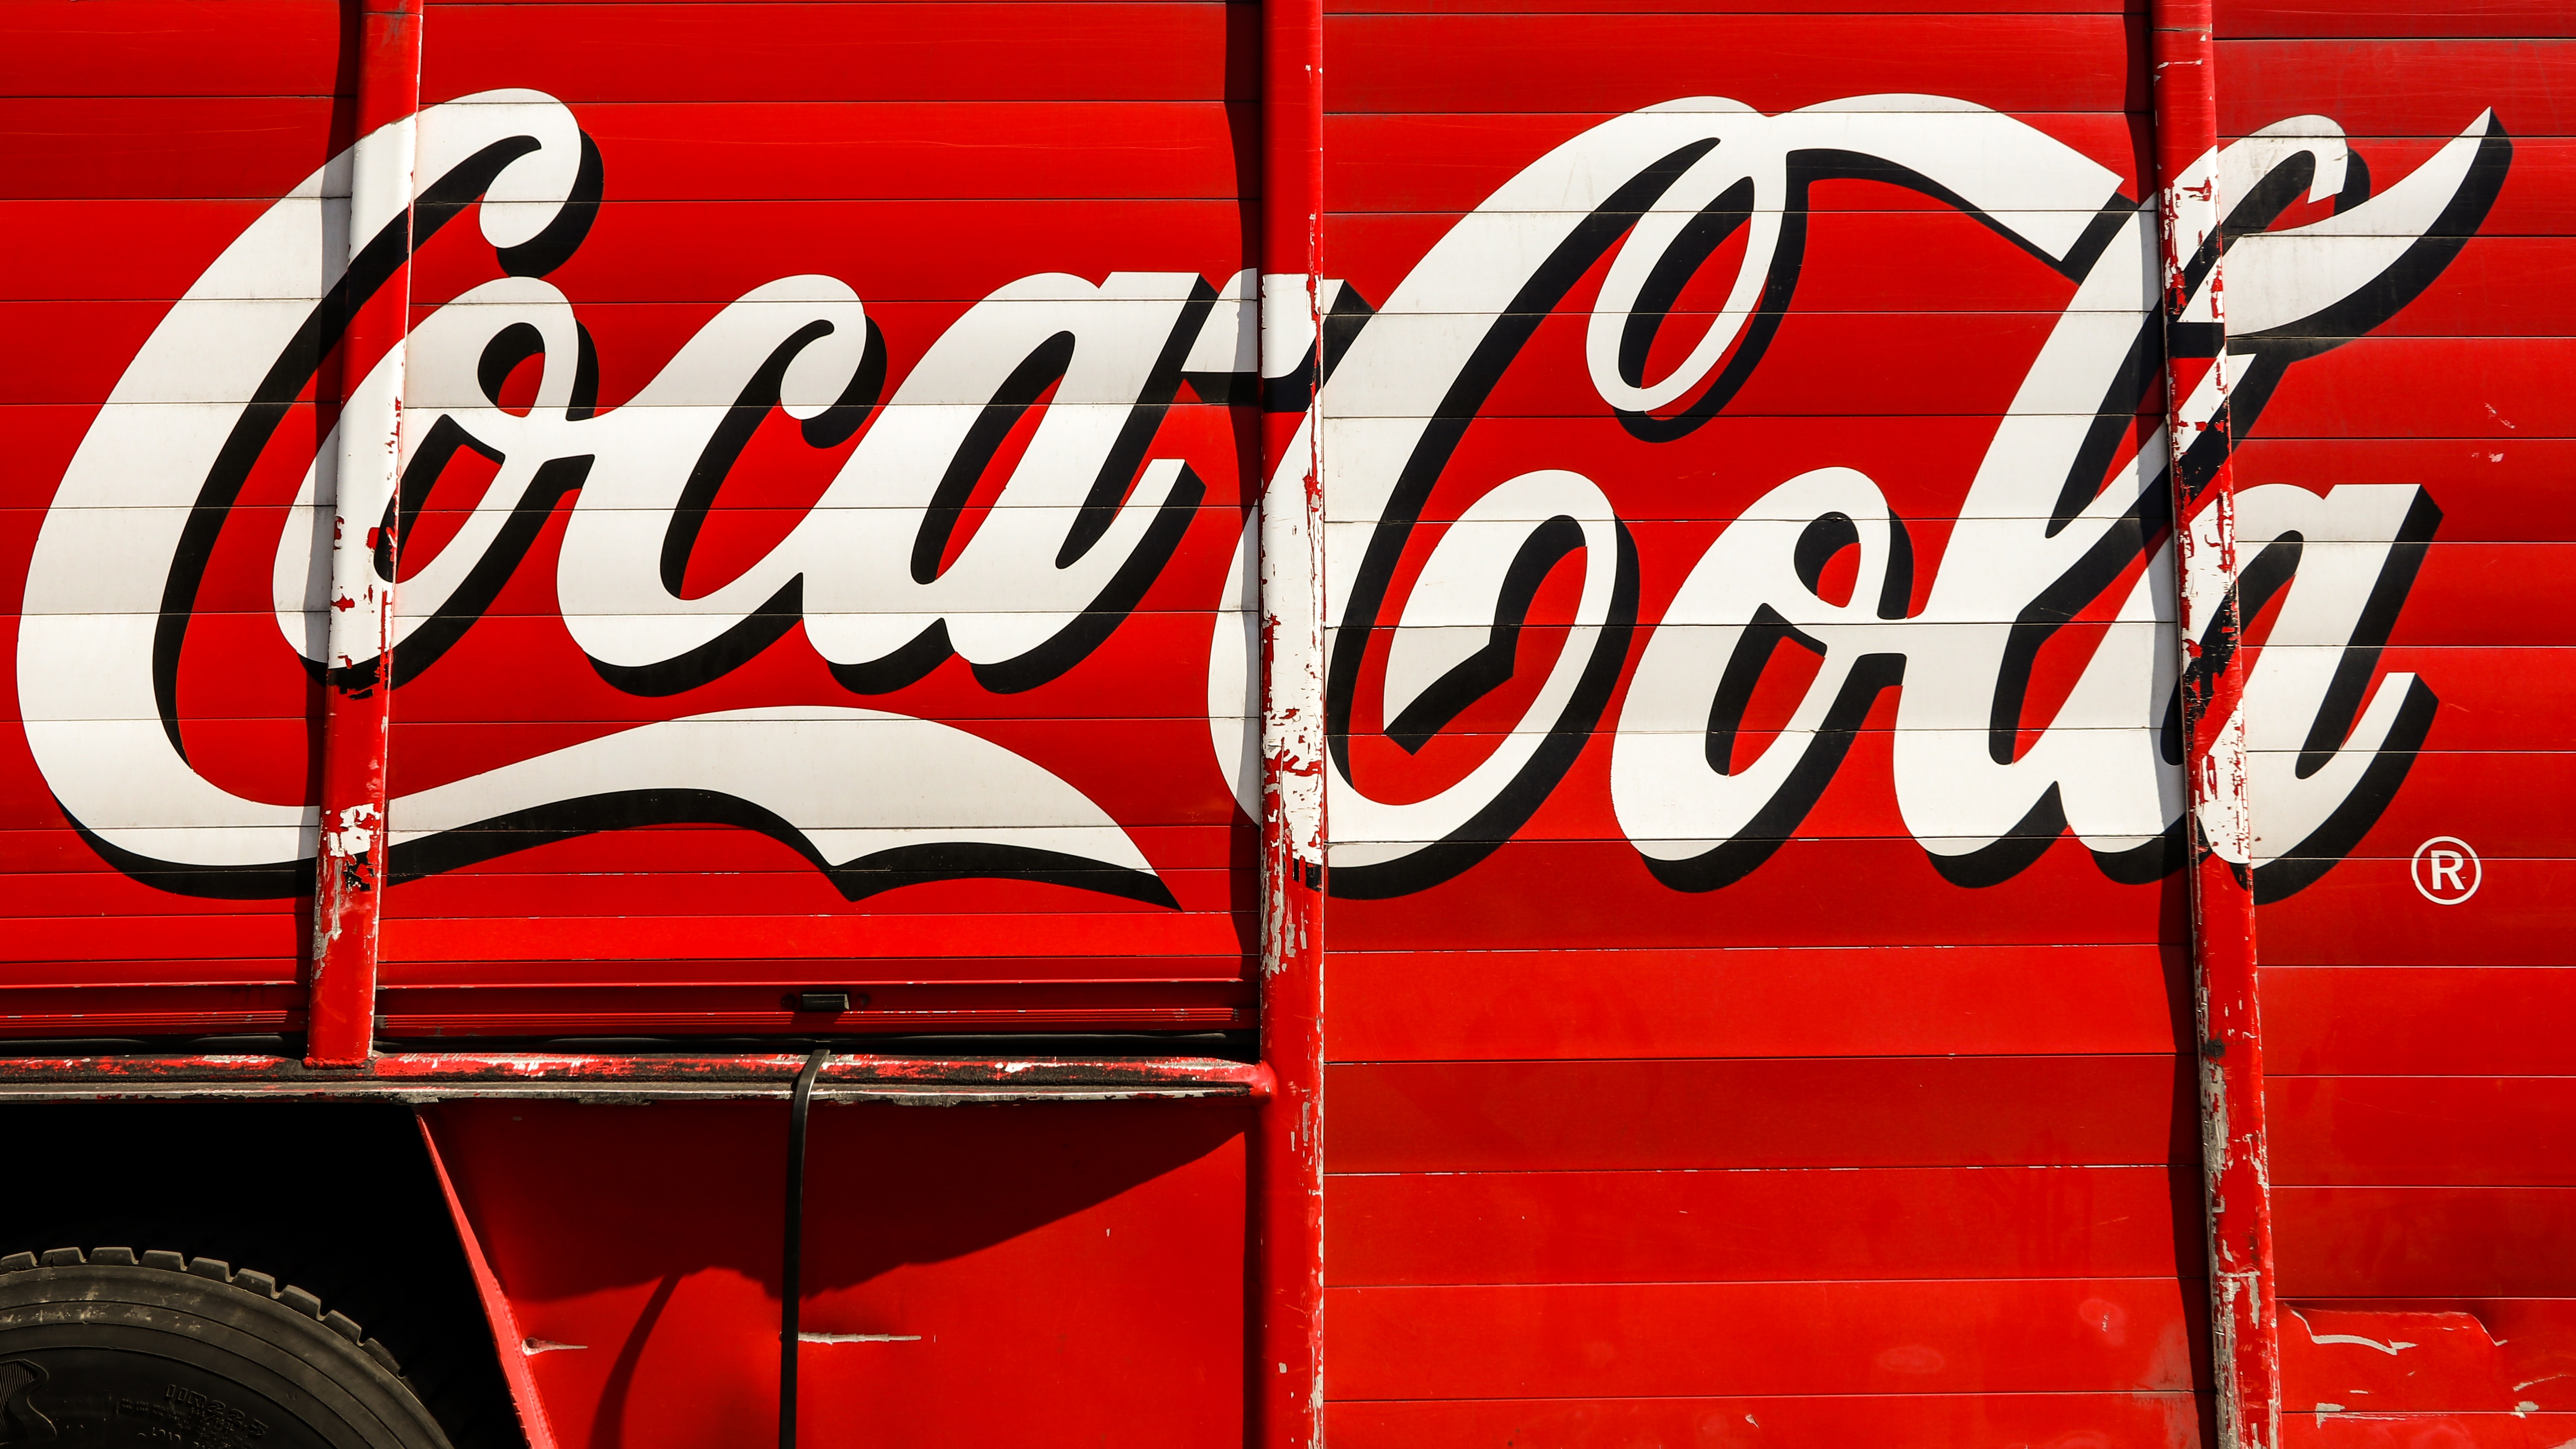 Coca-Cola: The most valuable food and beverage brand